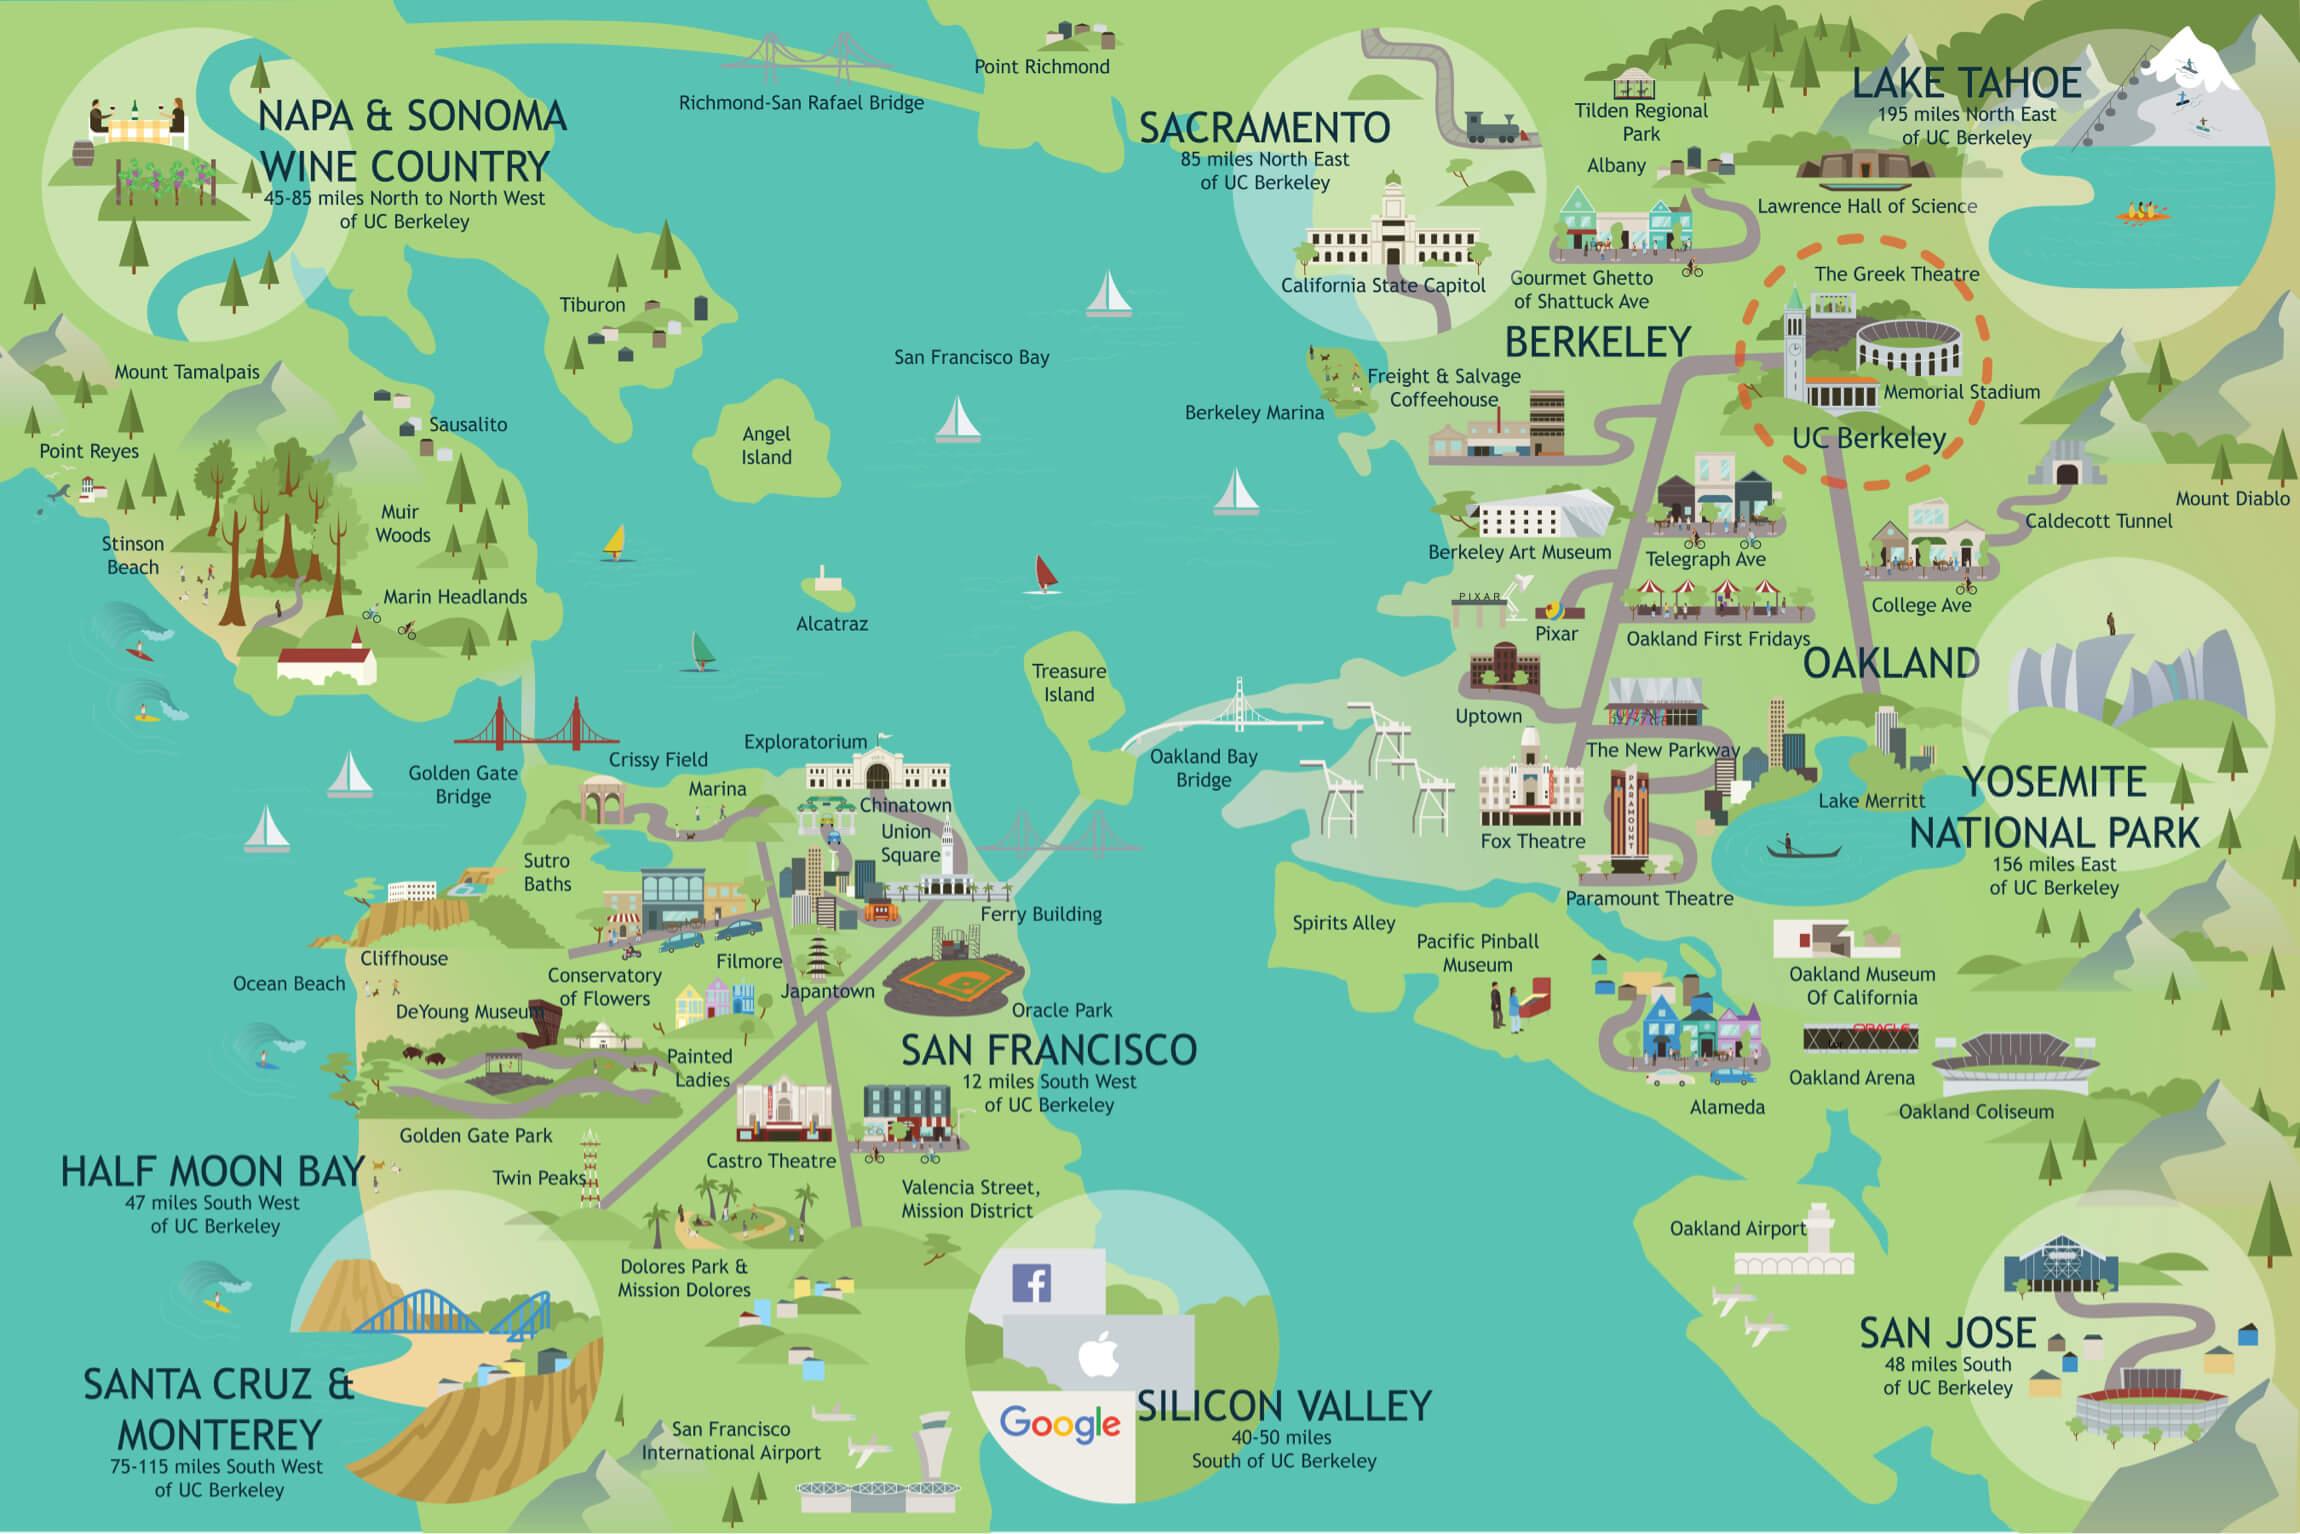 Illustrated map created by local artist Krystal Lauk